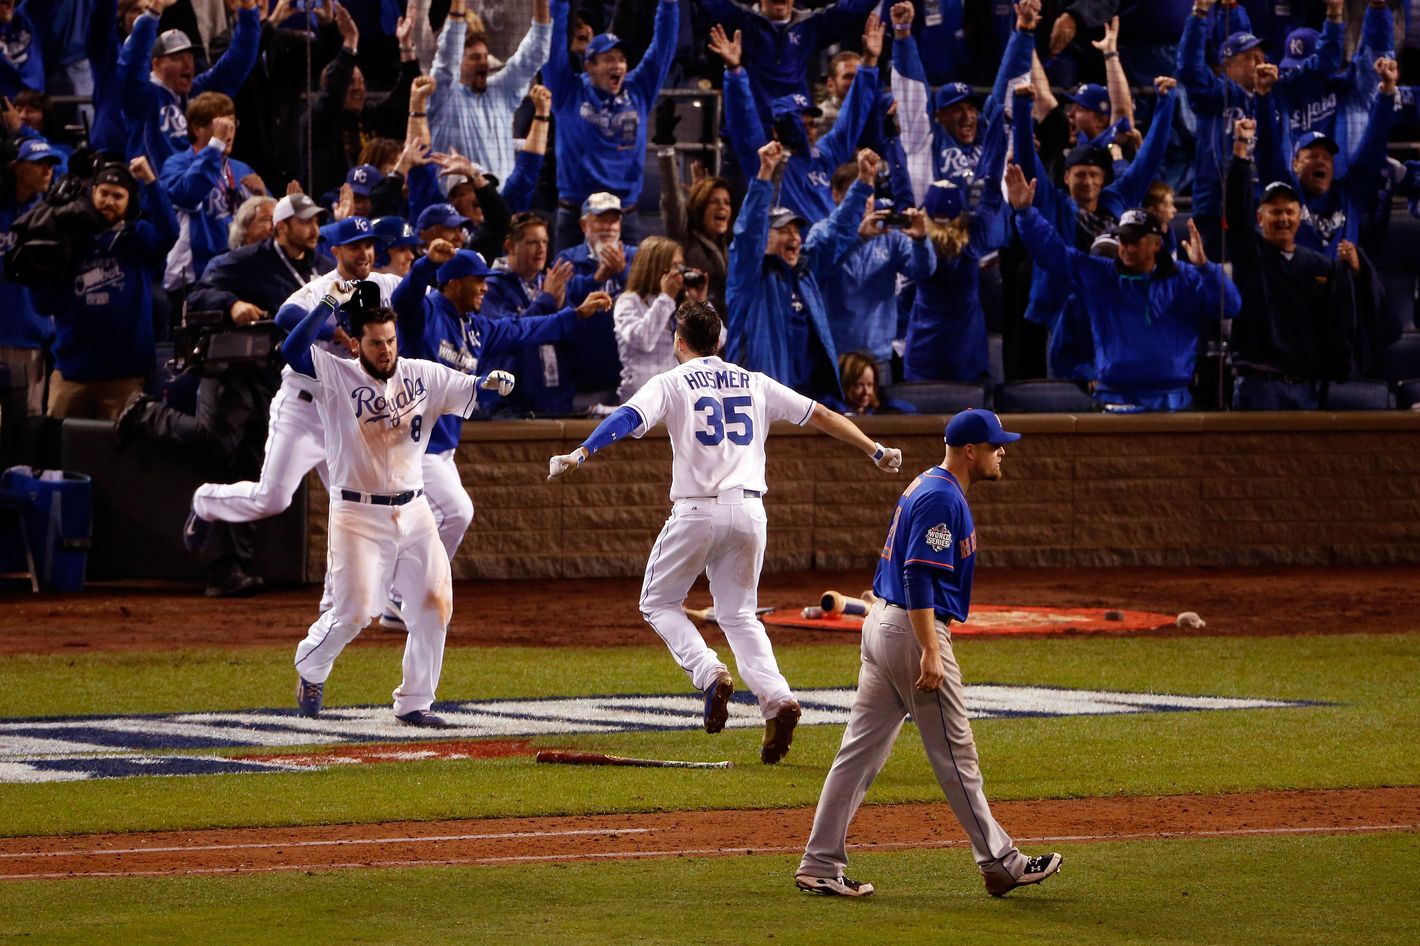 Royals show their October mettle in 14-inning, Game 1 conquest of Mets